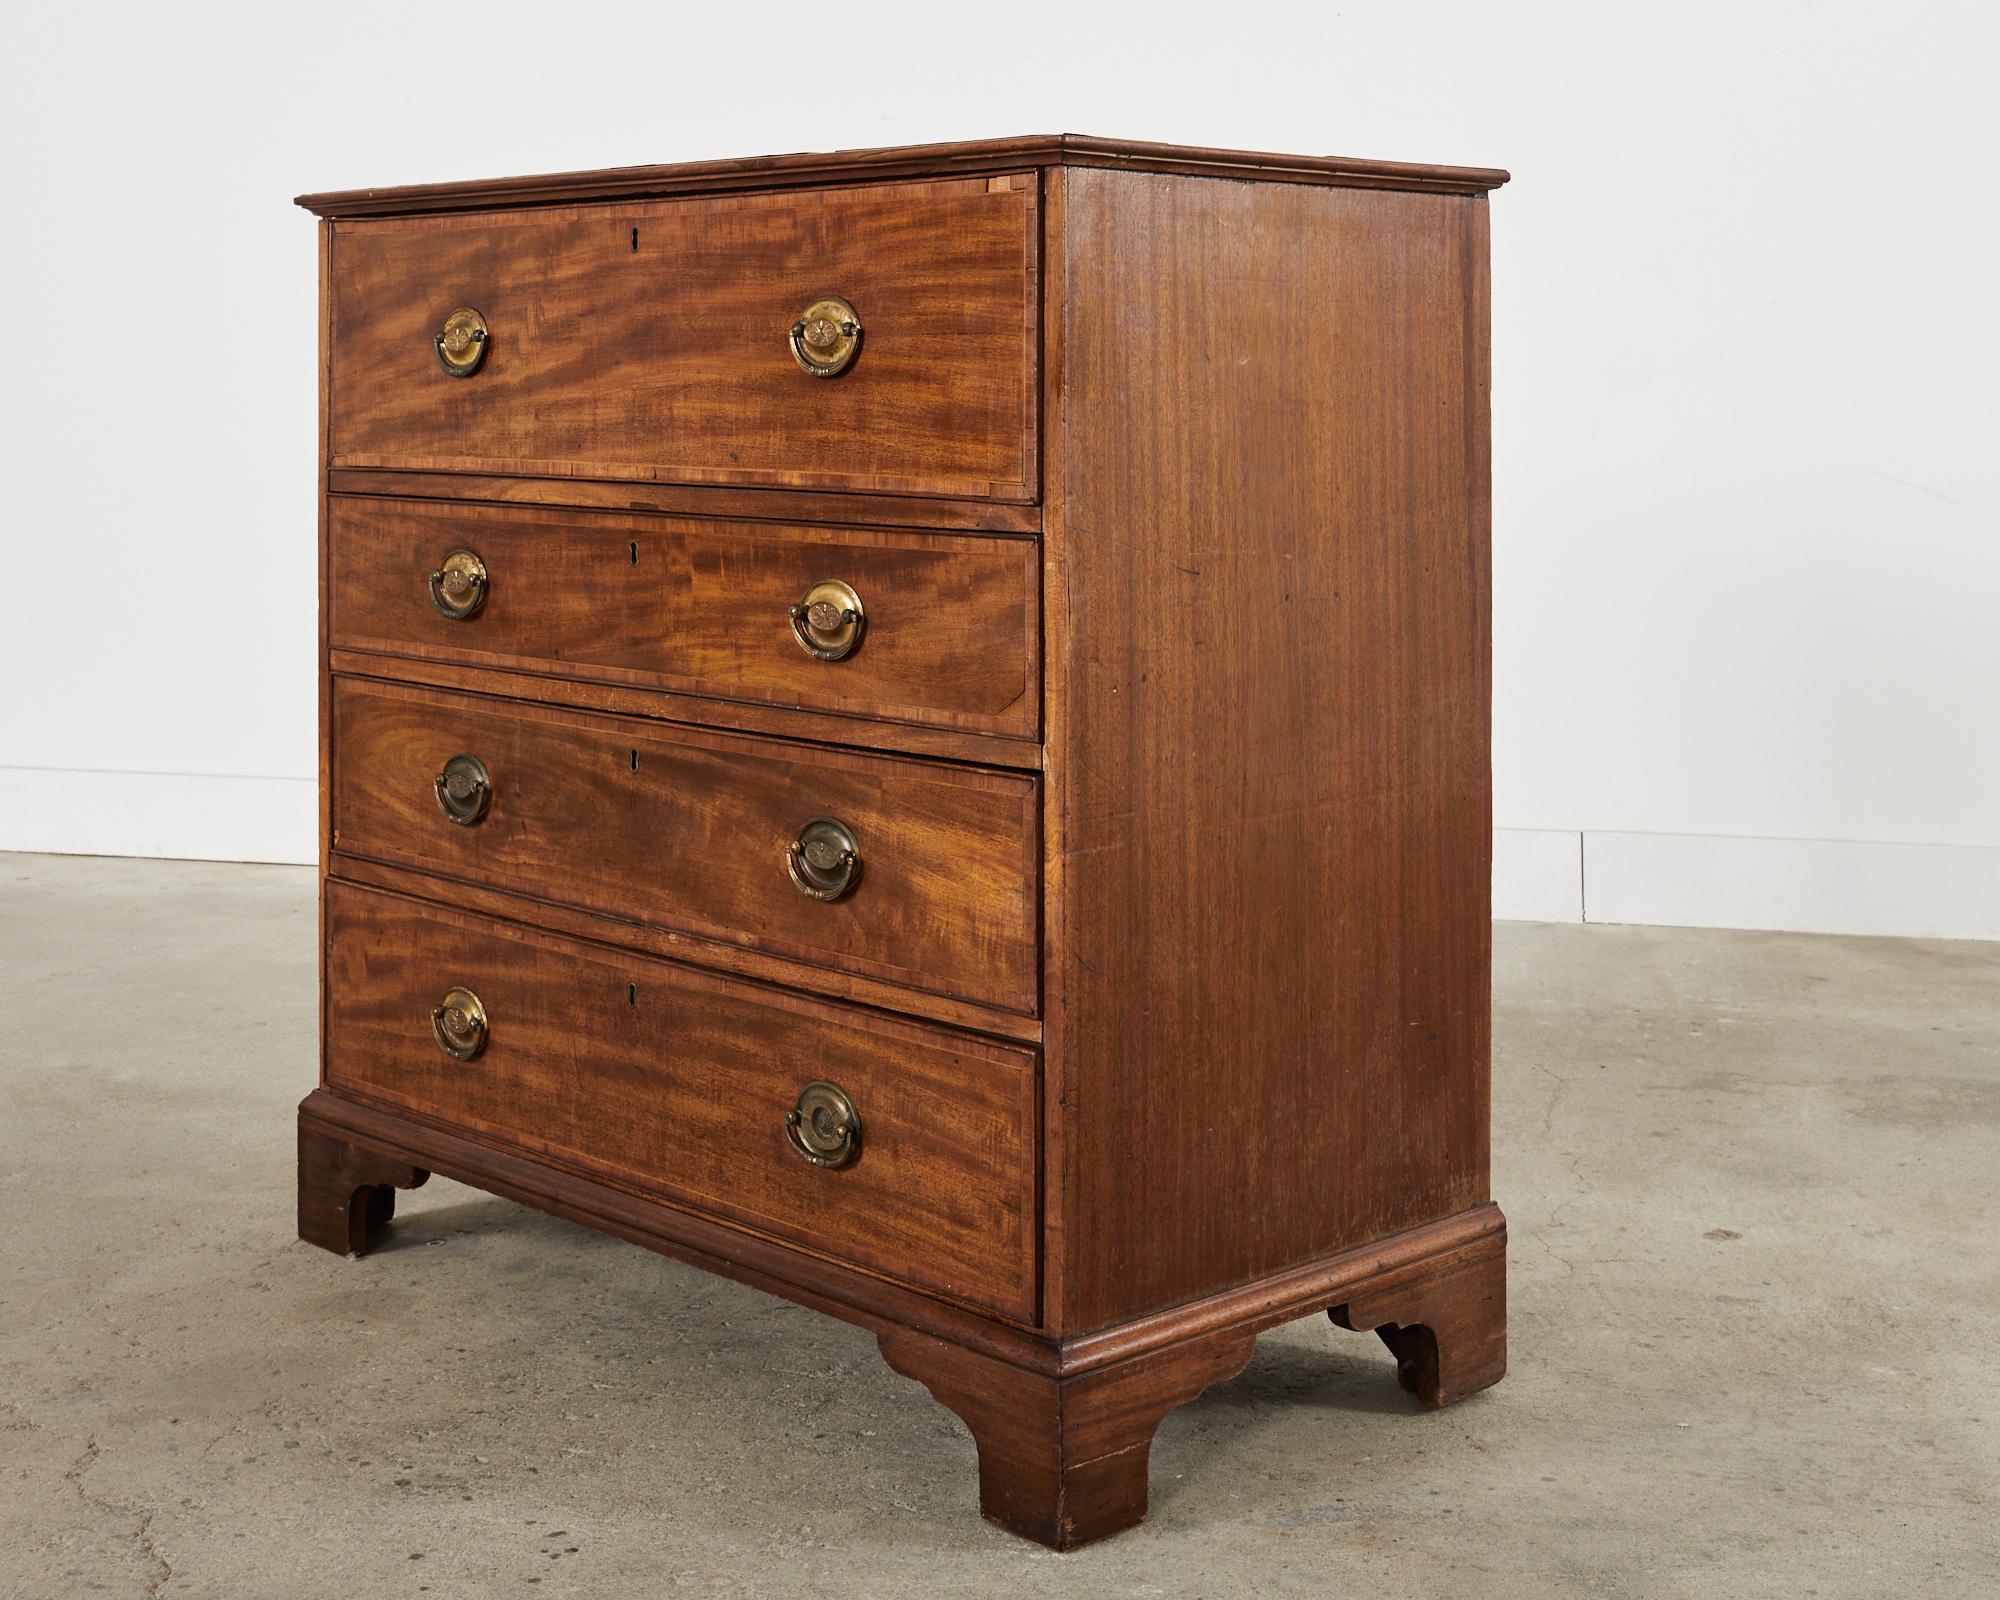 Hand-Crafted 19th Century Georgian Mahogany Secretaire Chest of Drawers